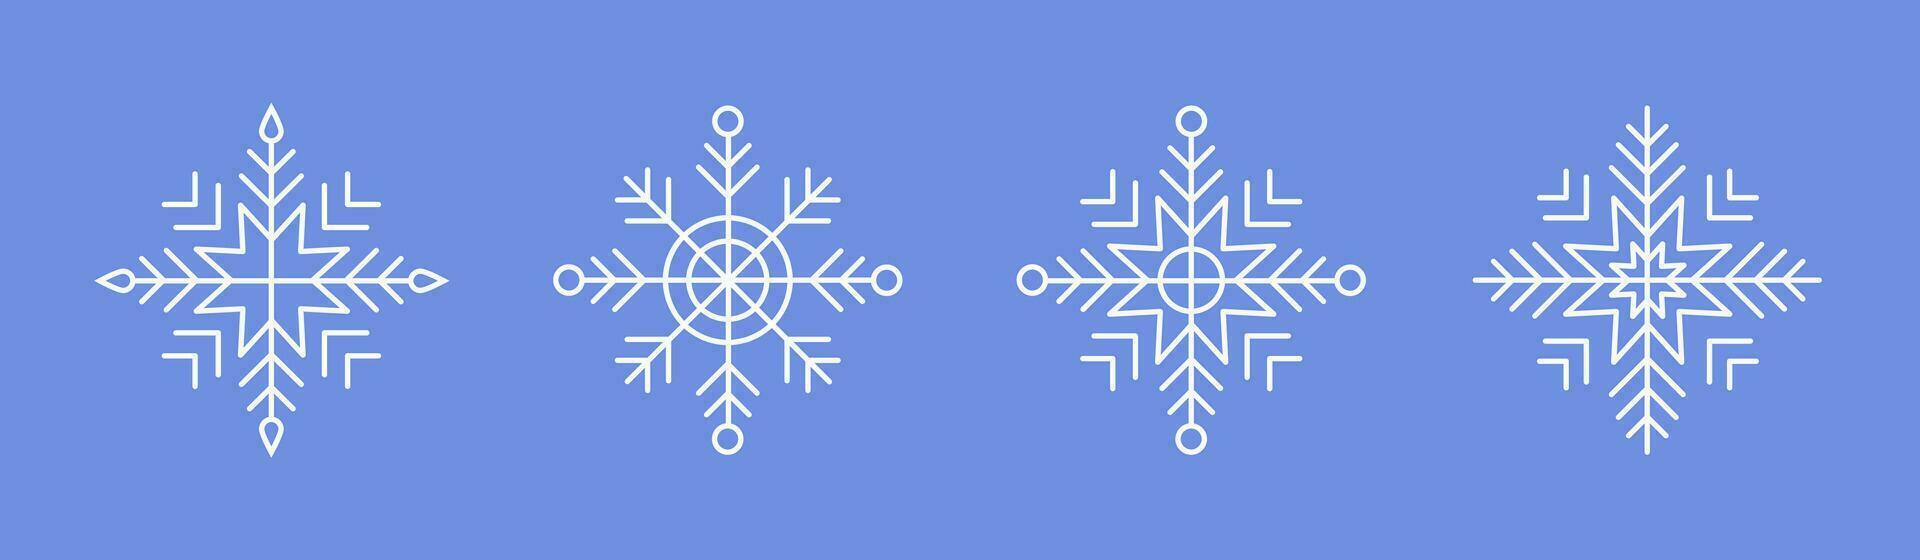 White Snowflakes on blue background. Editable Winter isolated icons in silhouette. Snow Crystals. Simple Line Style. Vector illustration